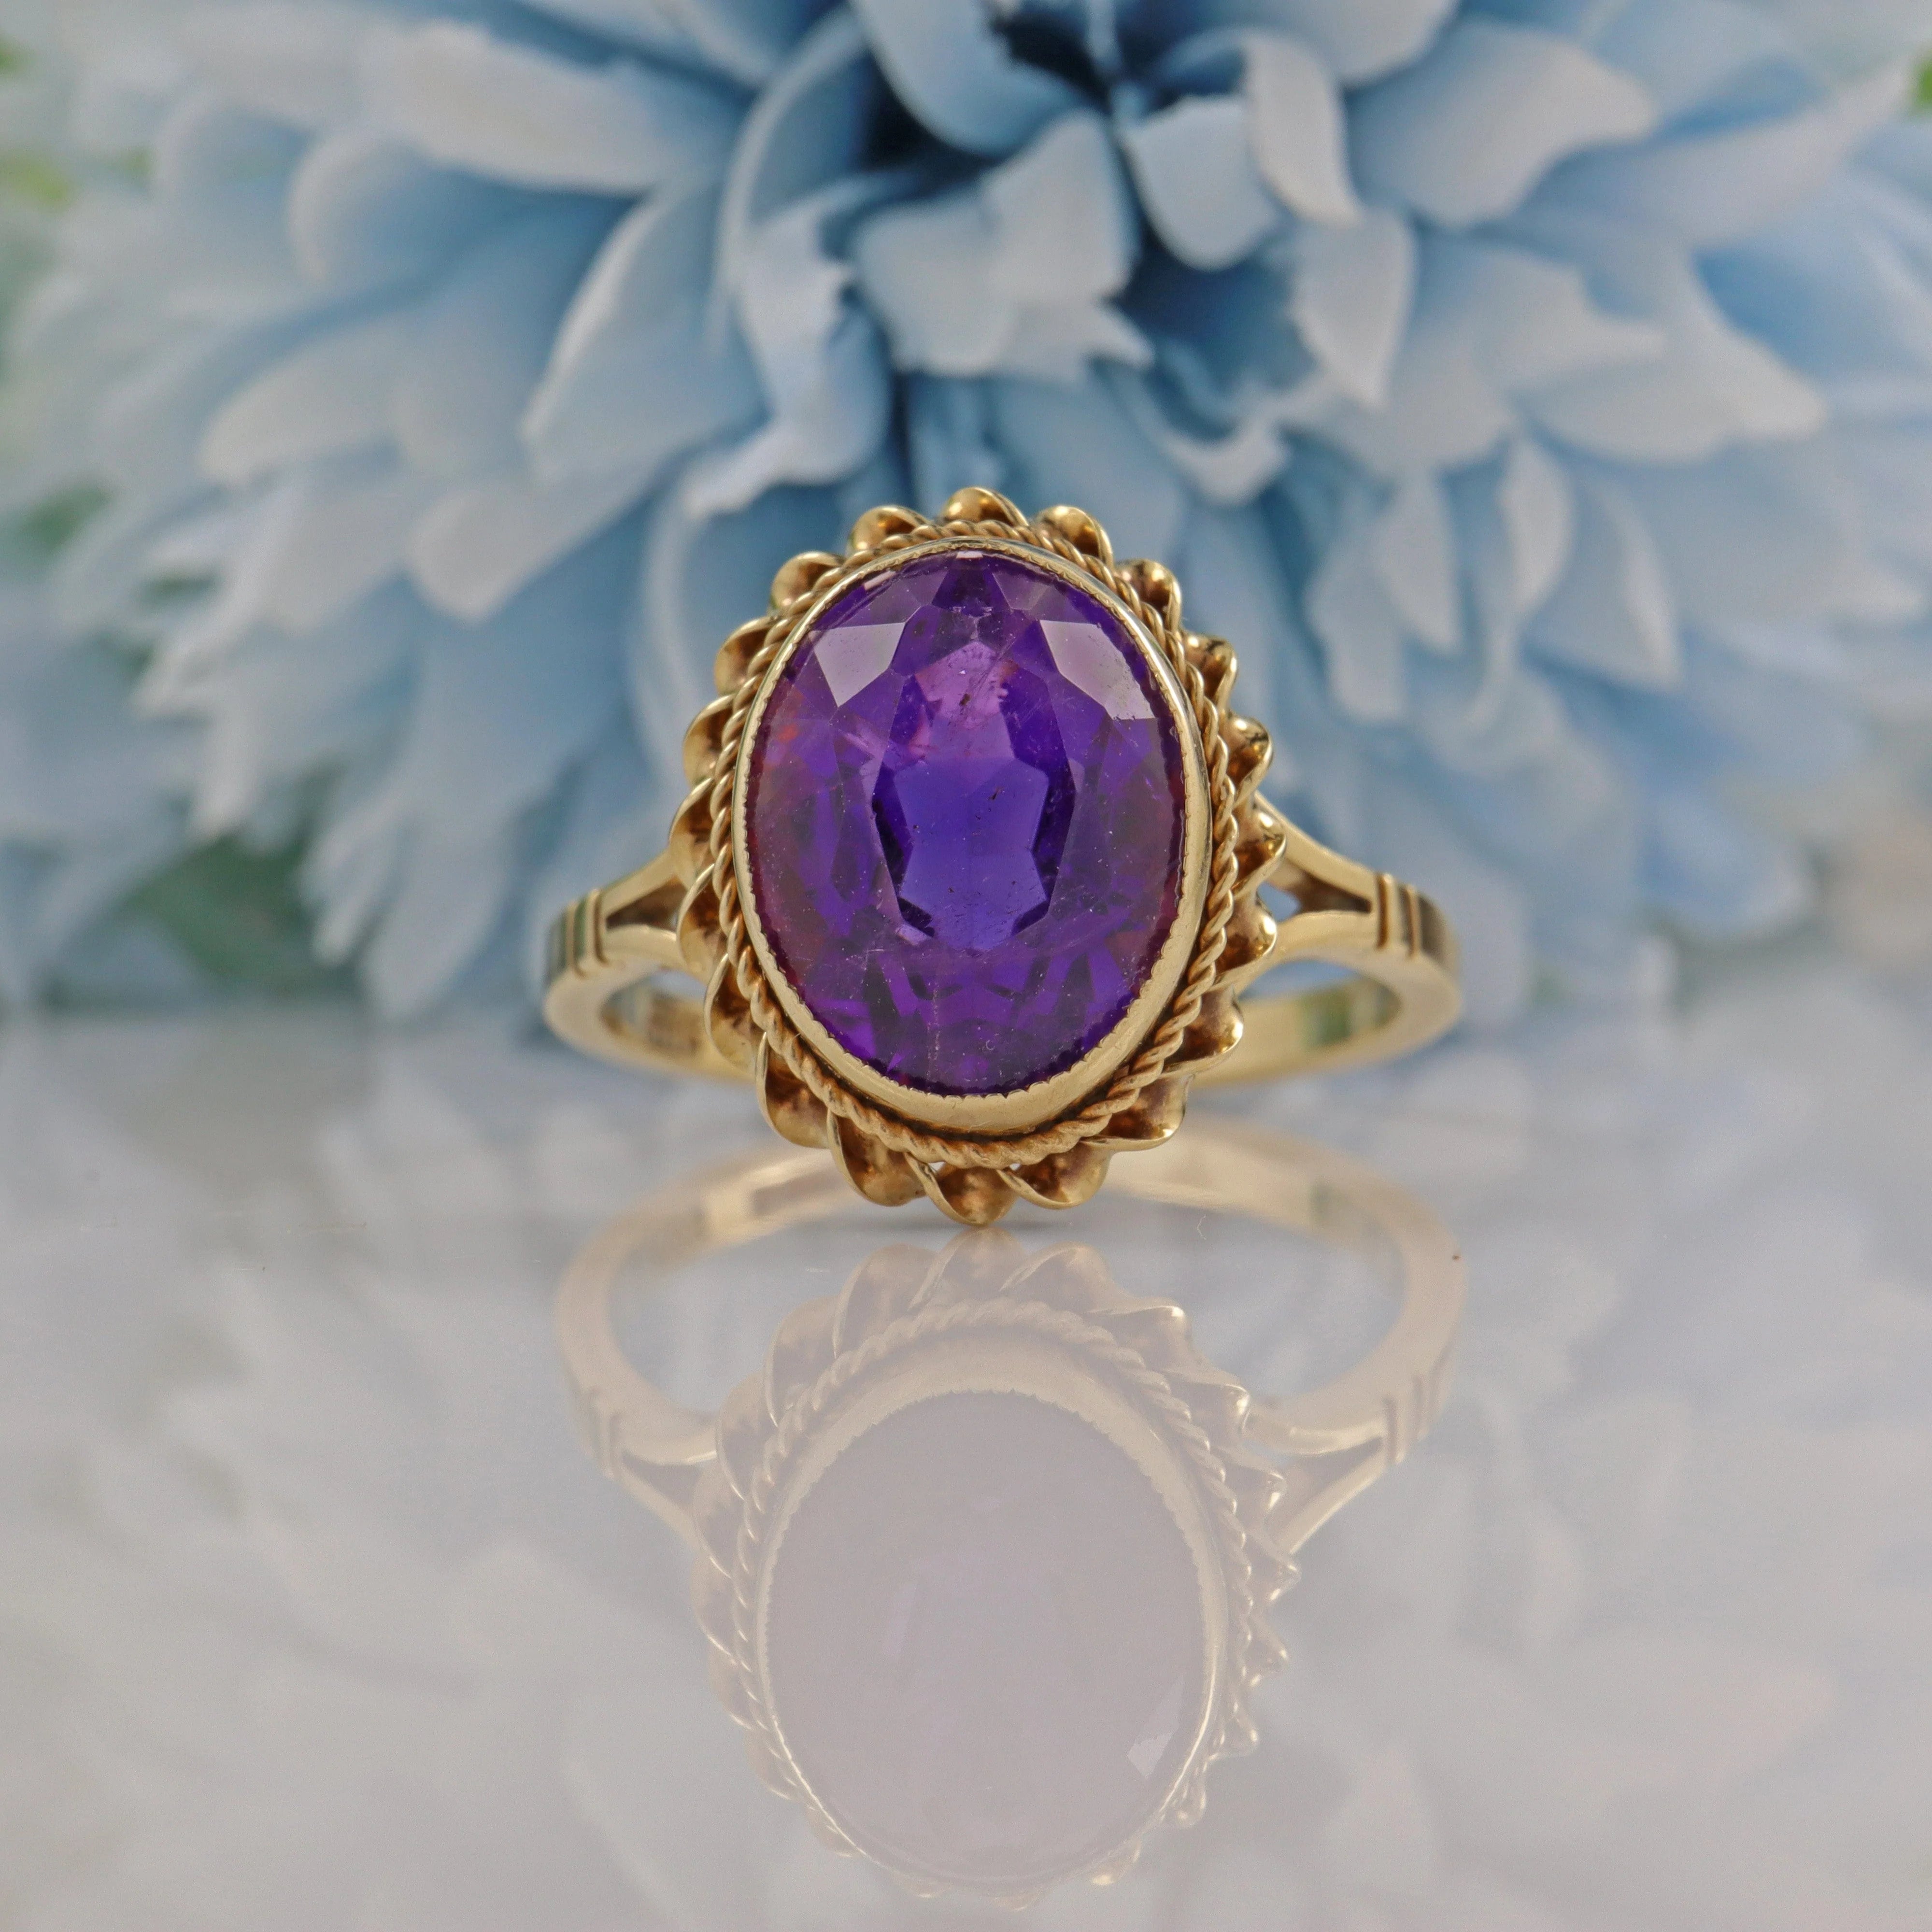 Ellibelle Jewellery Vintage 1970s Amethyst 9ct Gold Solitaire Ring